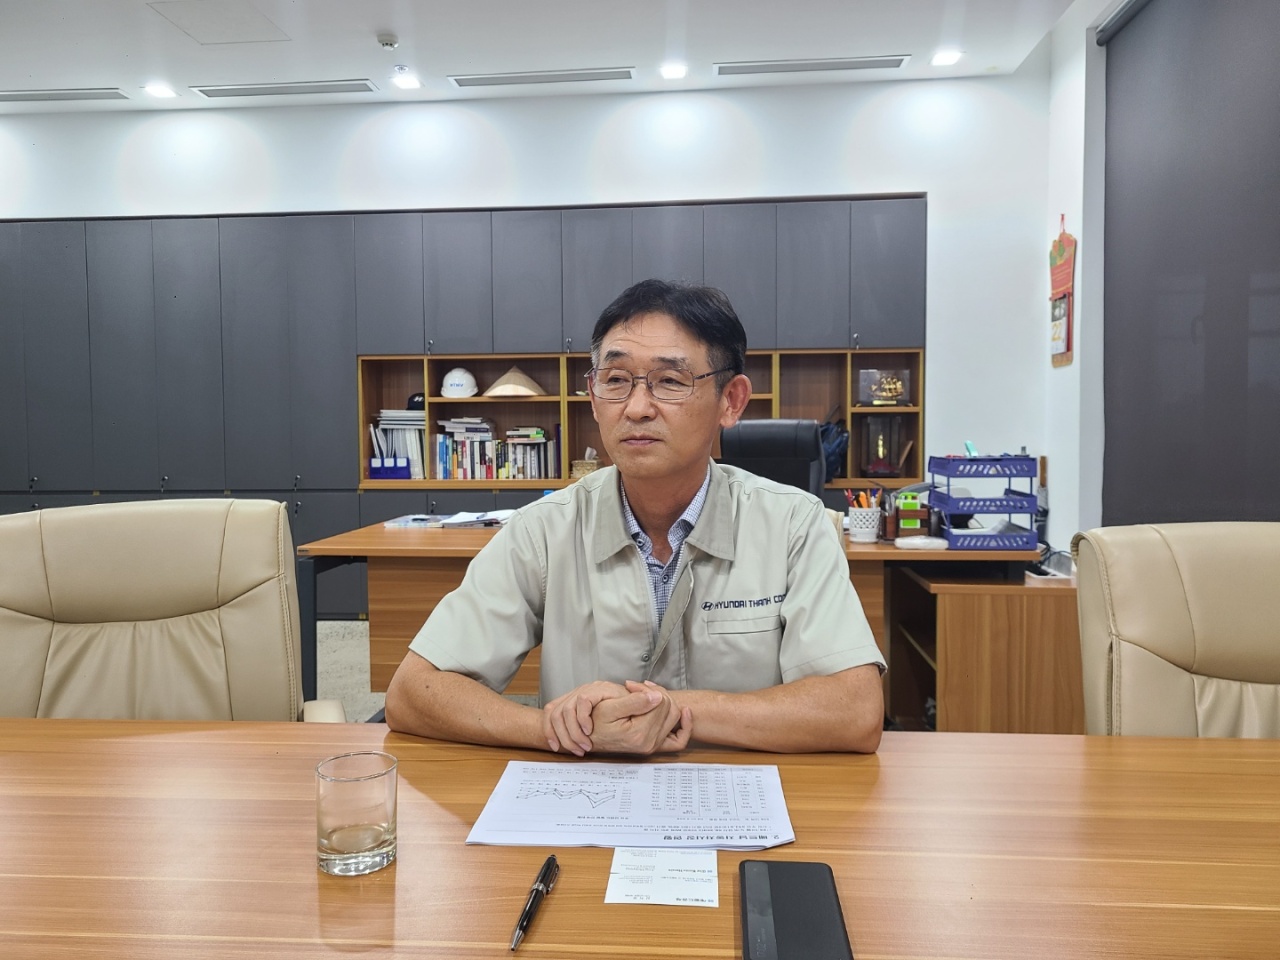 Jang Hyun-gu, Vice President of Hyundai Thanh Cong Vietnam Auto Manufacturing speaks with The Korea Herald at the office located within the automaker`s second factory in Ninh Binh province, Vietnam on Nov. 22. (The Korea Herald/ Jung Min-kyung)